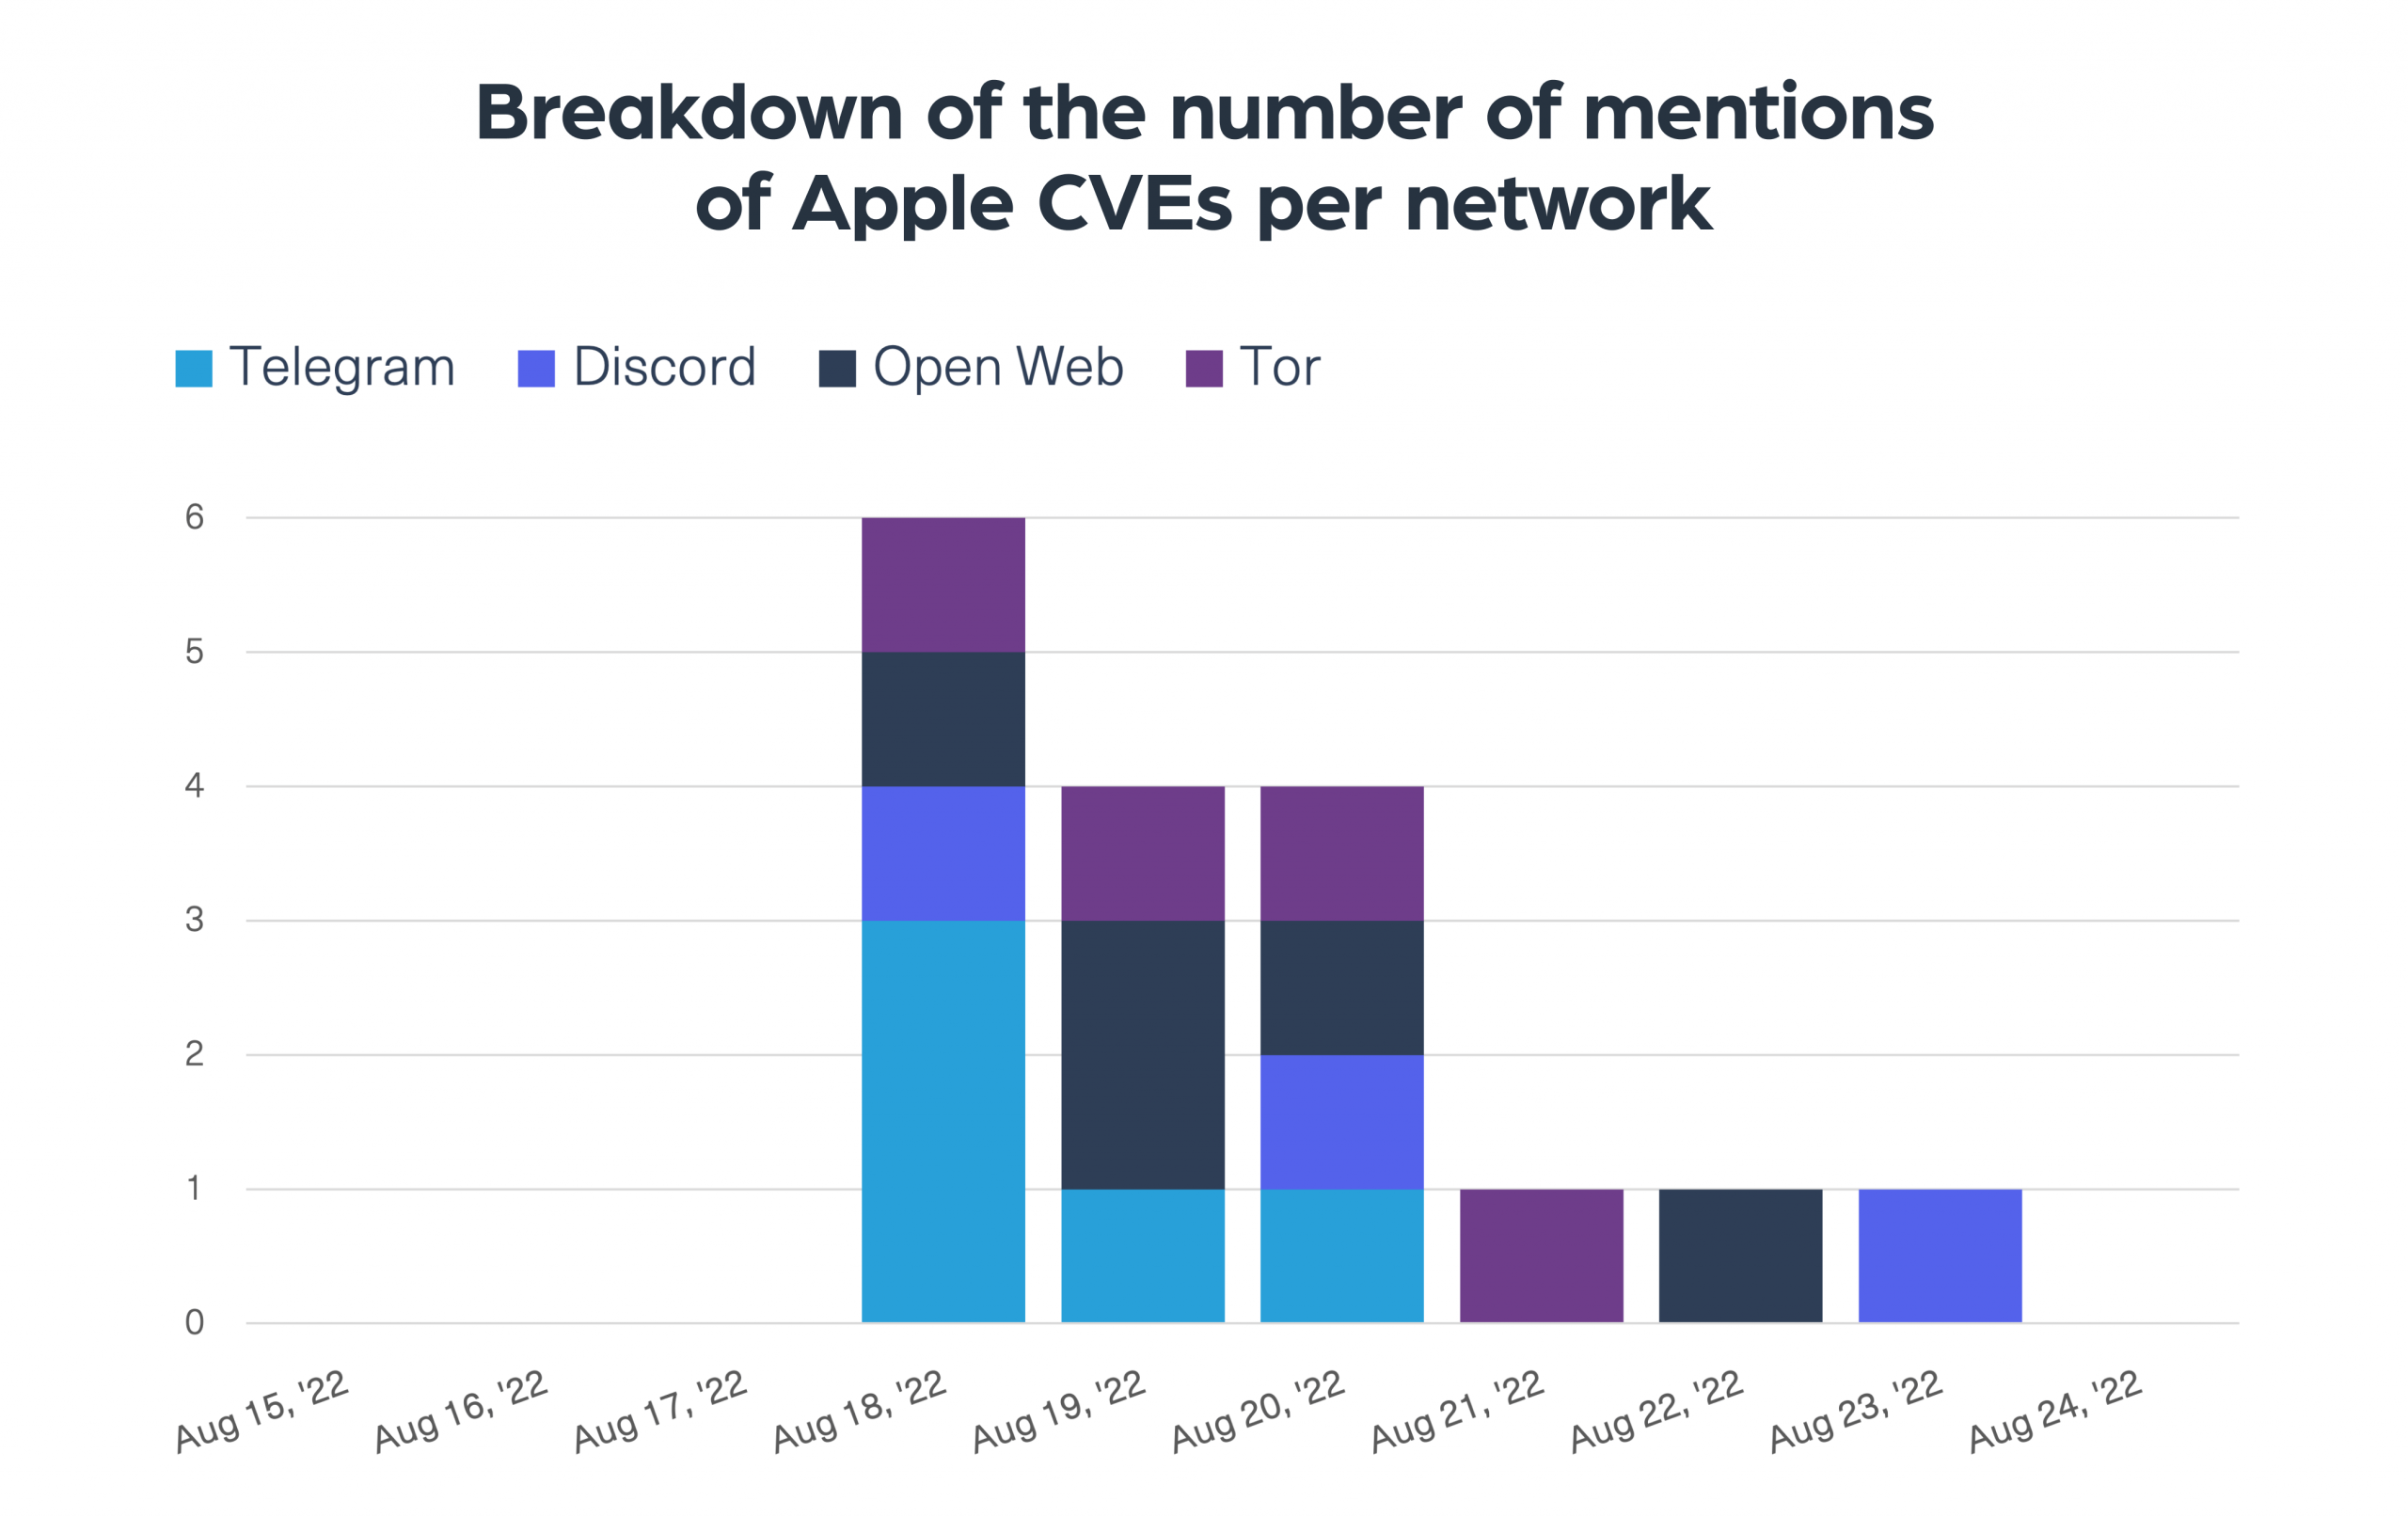 Breakdown of the number of mentions of Apple CVEs per network